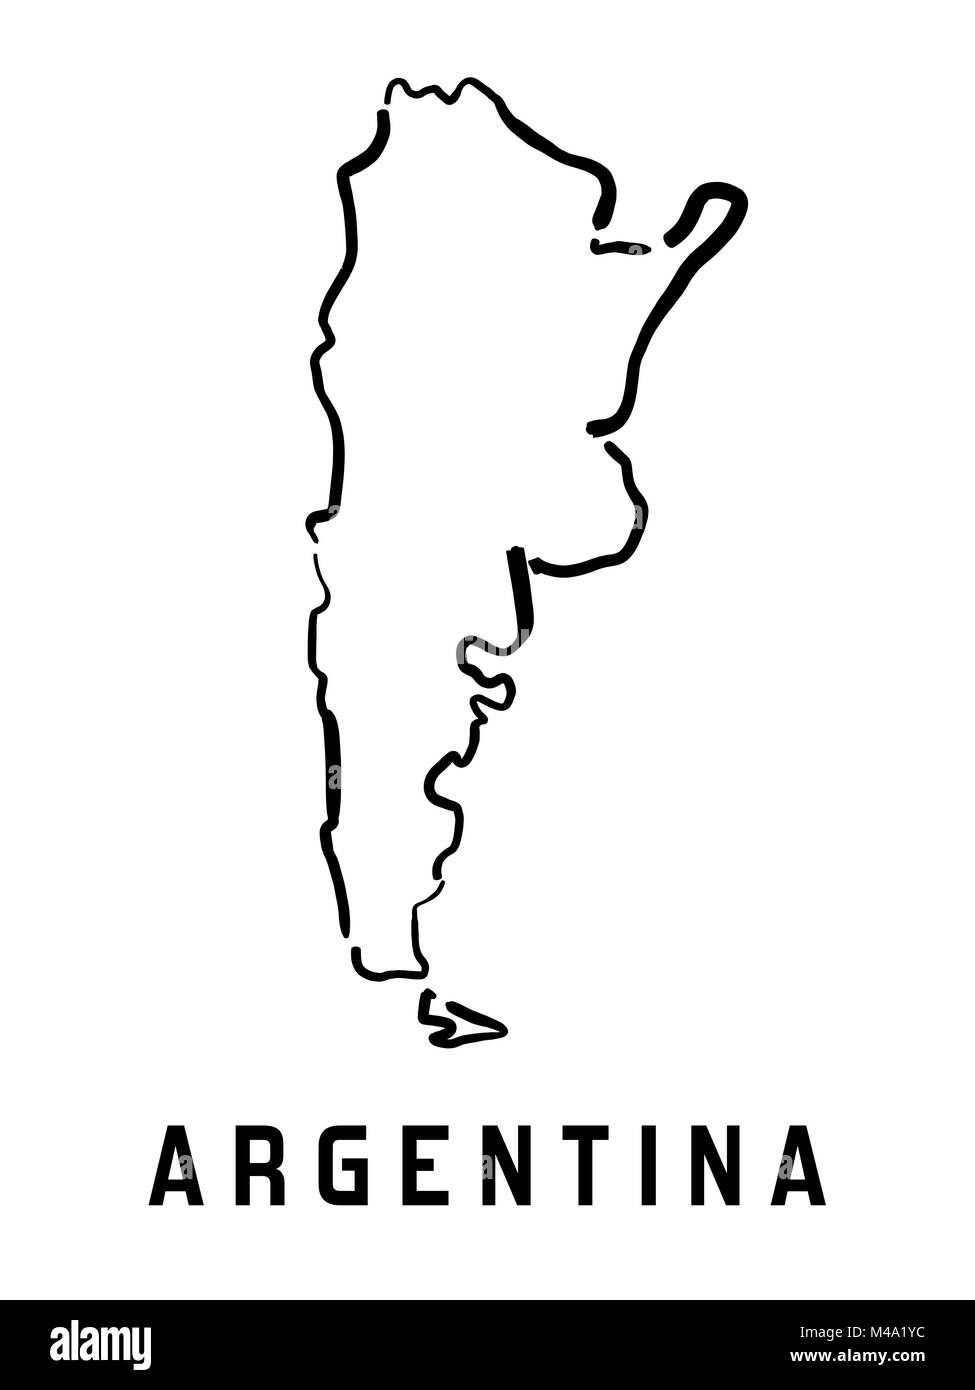 Argentina map outline - smooth simplified country shape map vector. Stock Vector